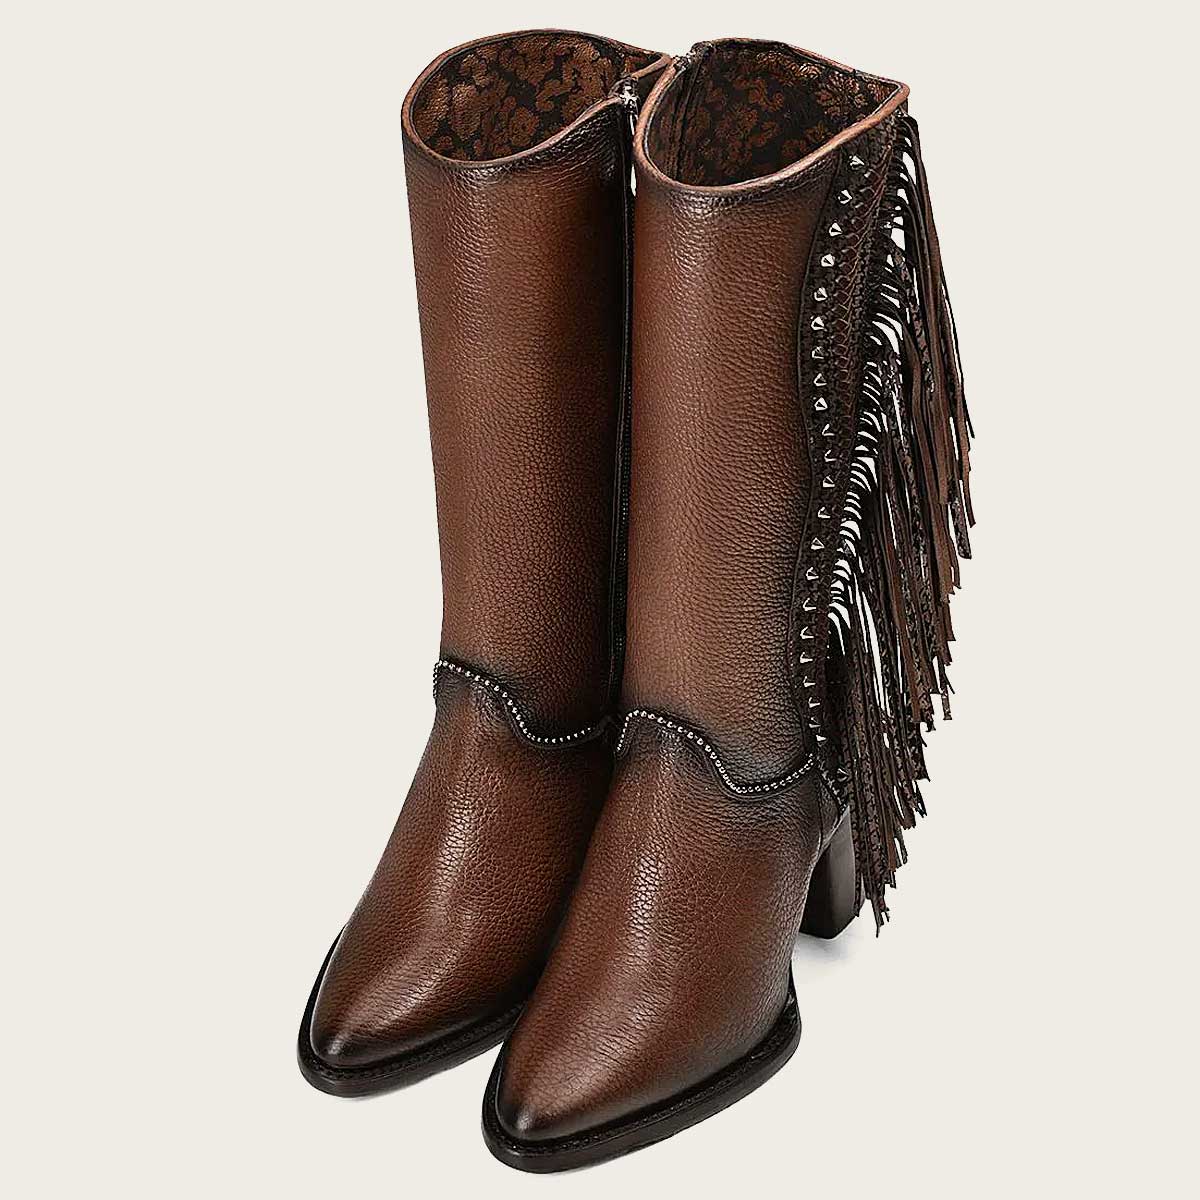 Braiding brown leather boots, in bovine leather.